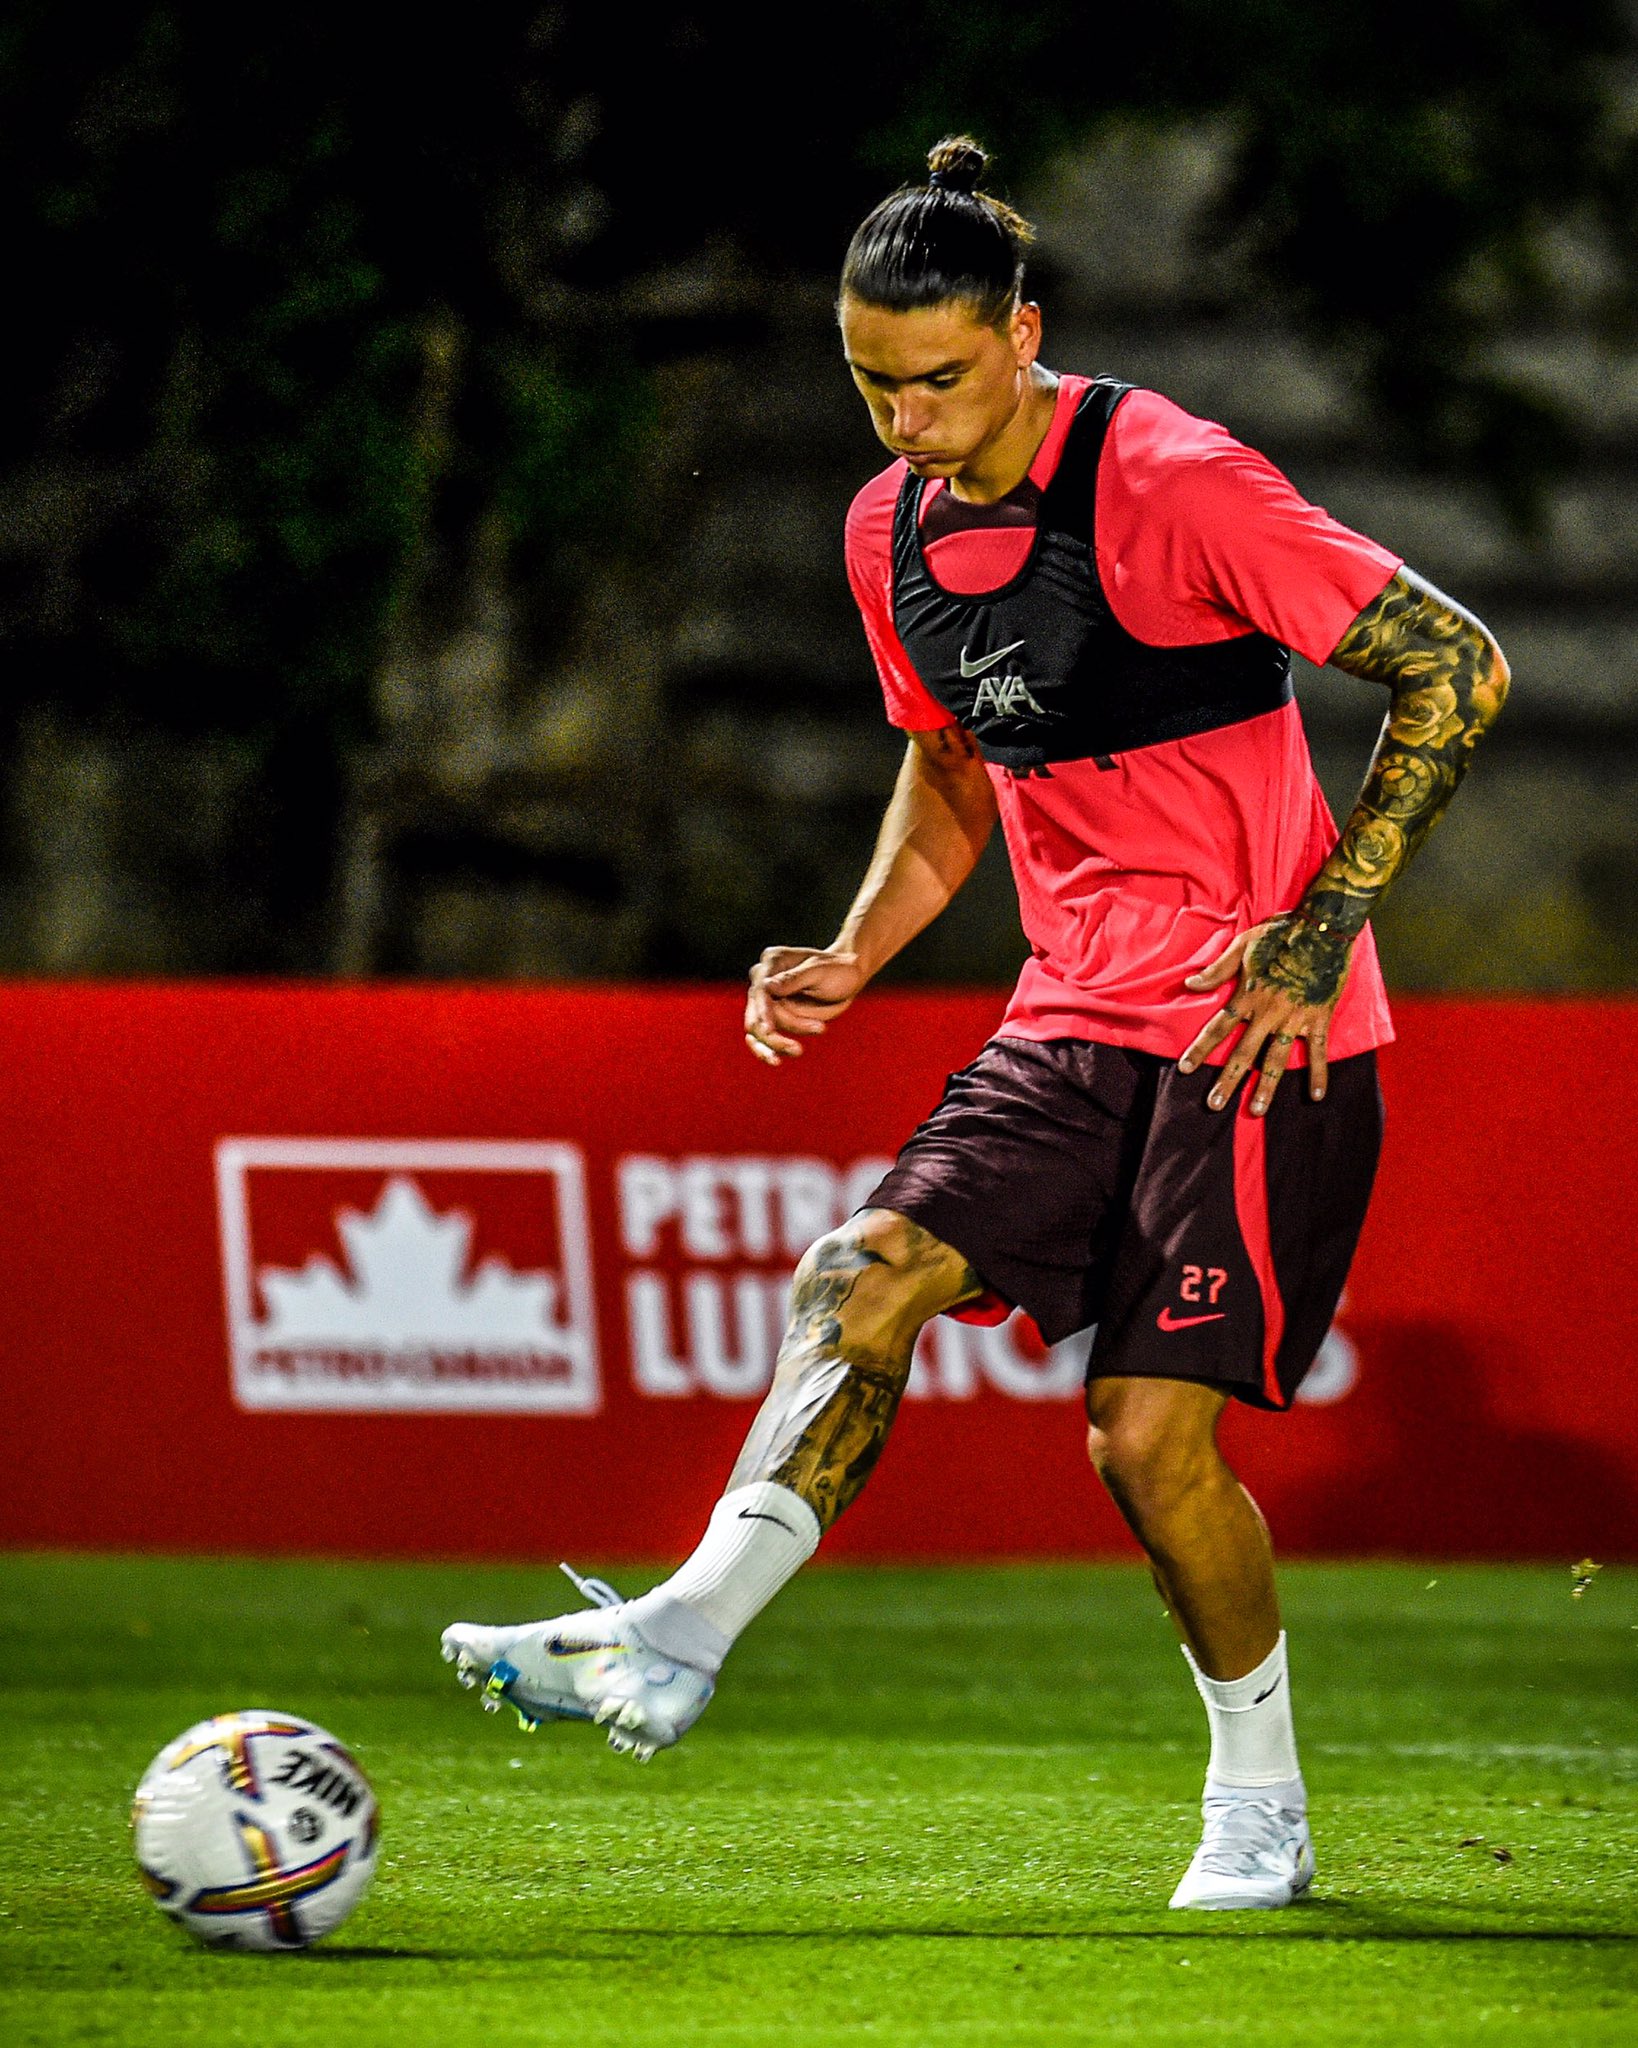 Warriors of Uruguay on X: "Darwin Núñez has started training for Liverpool.  On pre-season tour in Thailand, Darwin is preparing for his first season at  Anfield. Exciting times. https://t.co/9kpD9UszAv" / X